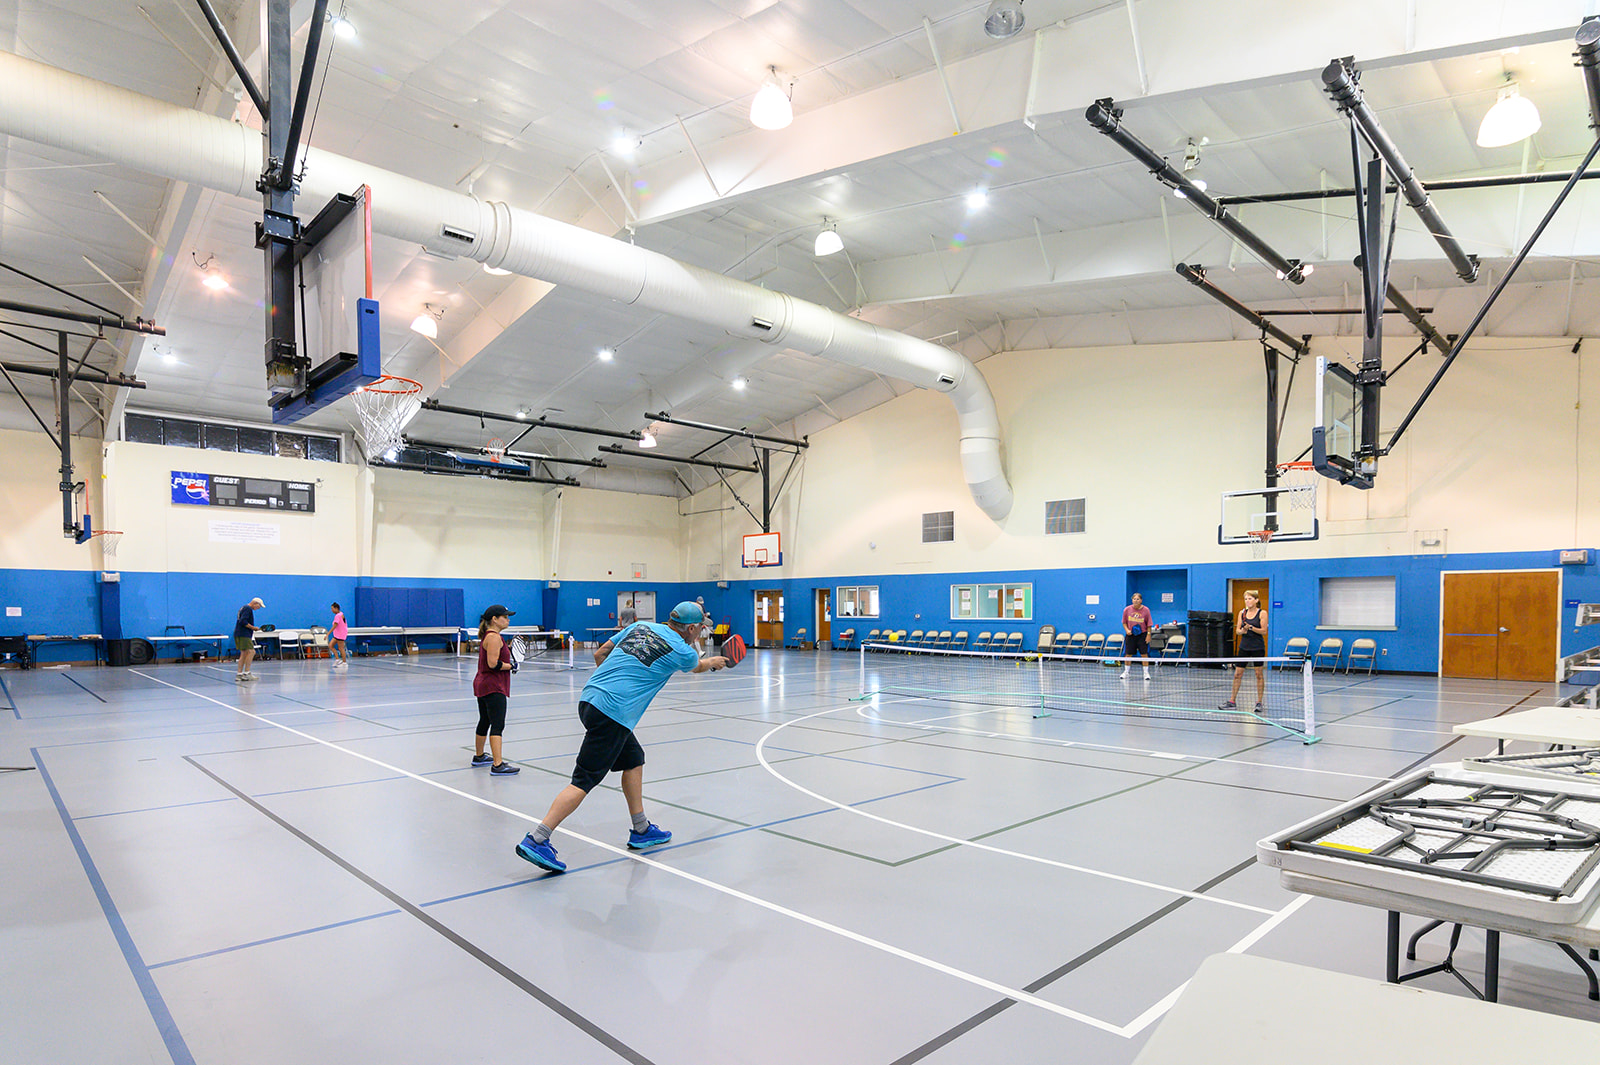 Image of four people playing pickleball on an indoor court.